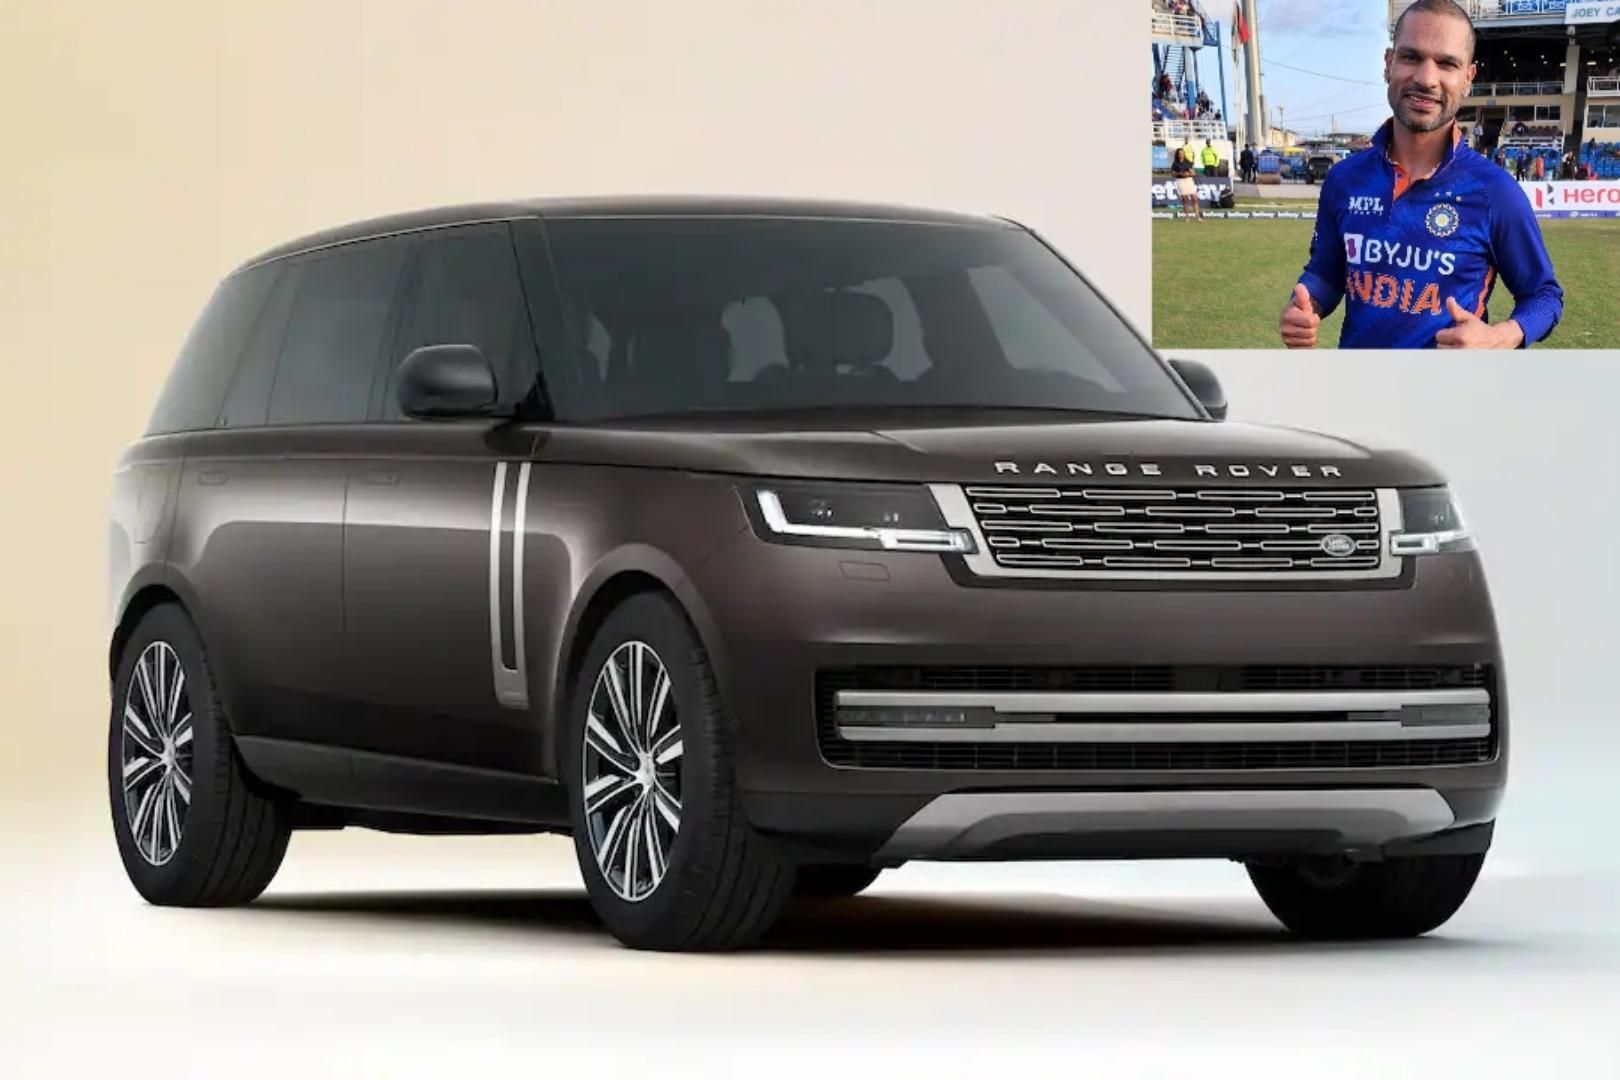 3 Things To Know About Shikhar Dhawan’s Latest Ride, The Land Rover Range Rover Autobiography